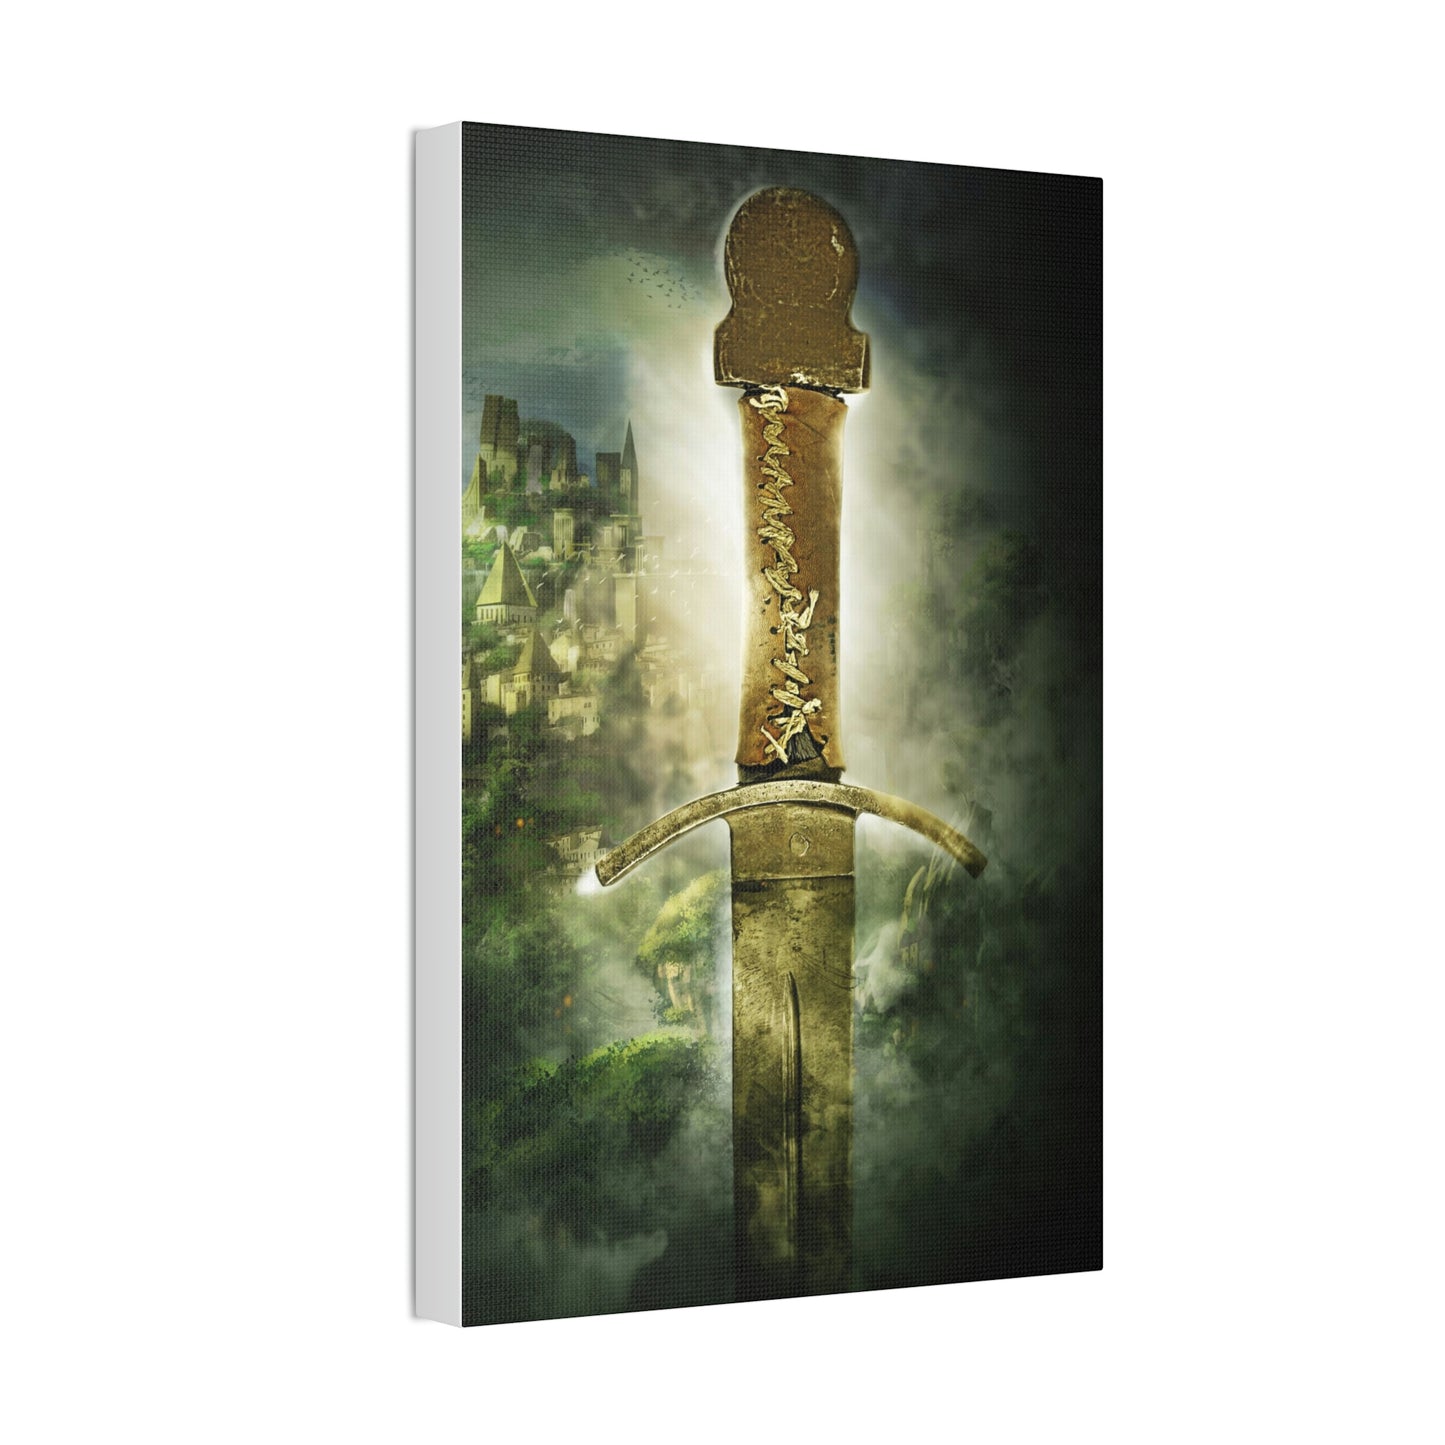 The Blade - Canvas